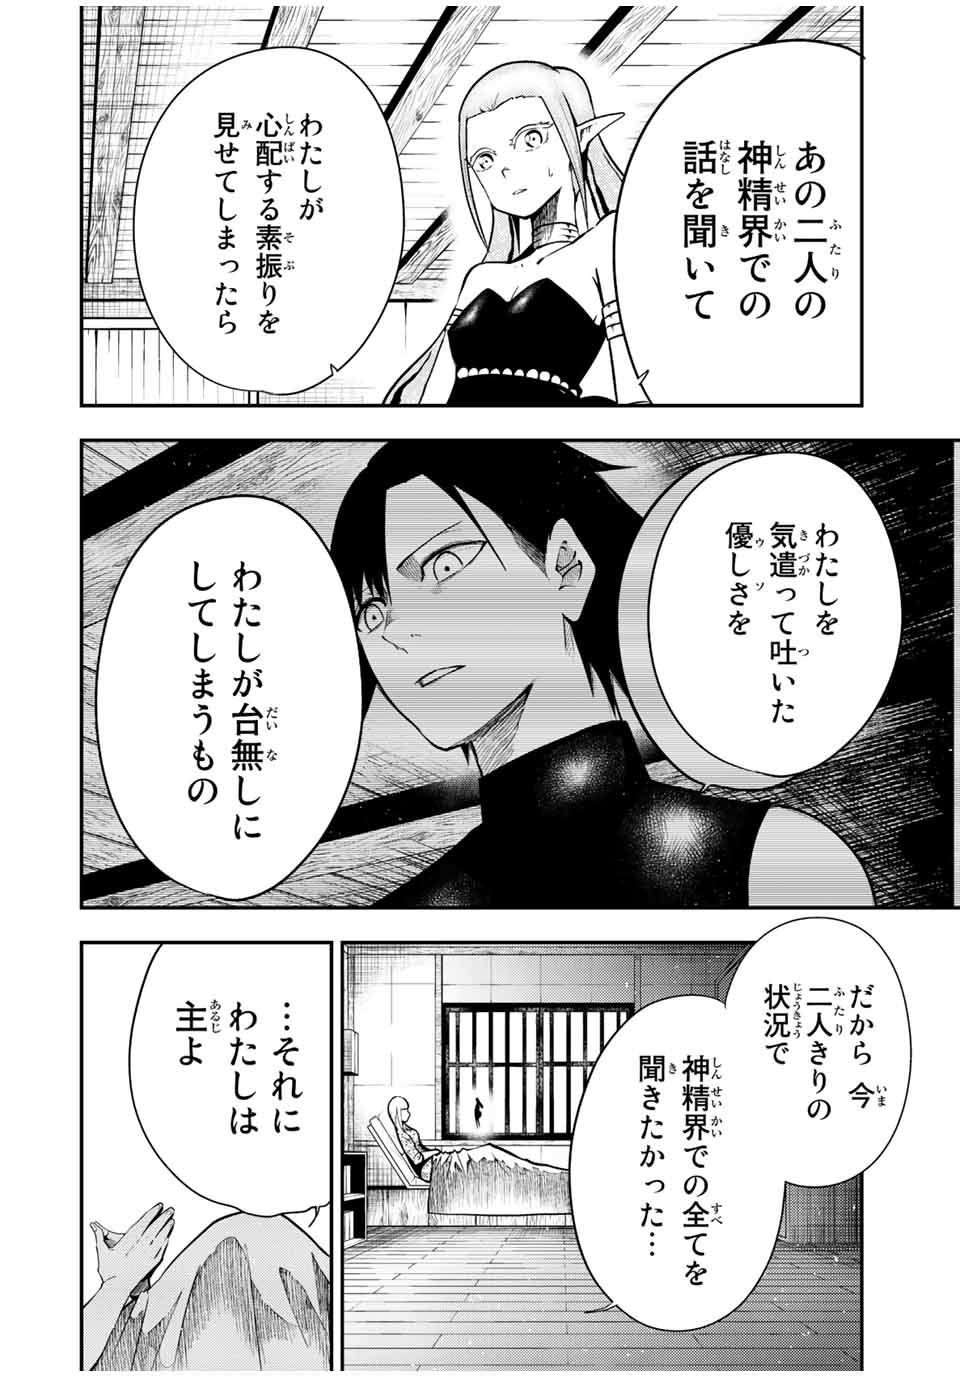 the strongest former prince-; 奴隷転生 ～その奴隷、最強の元王子につき～ 第78話 - Page 14